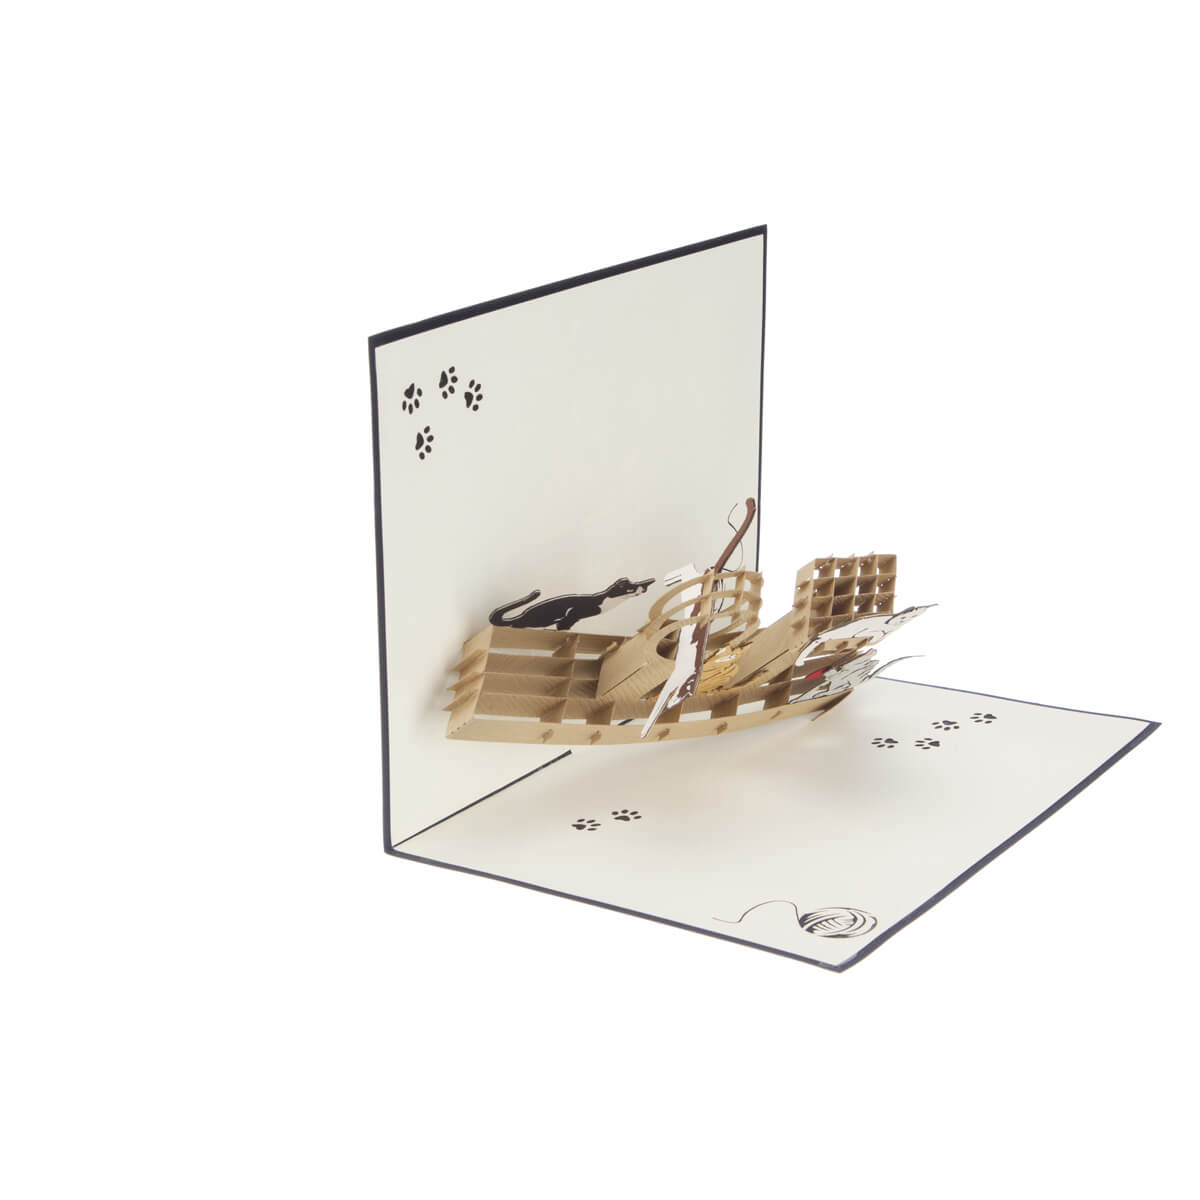 "Cat Tree" pop up birthday cat card featuring a 3D wood effect paper cat tree with 5 cats playing on it, half open at 90 degree angle